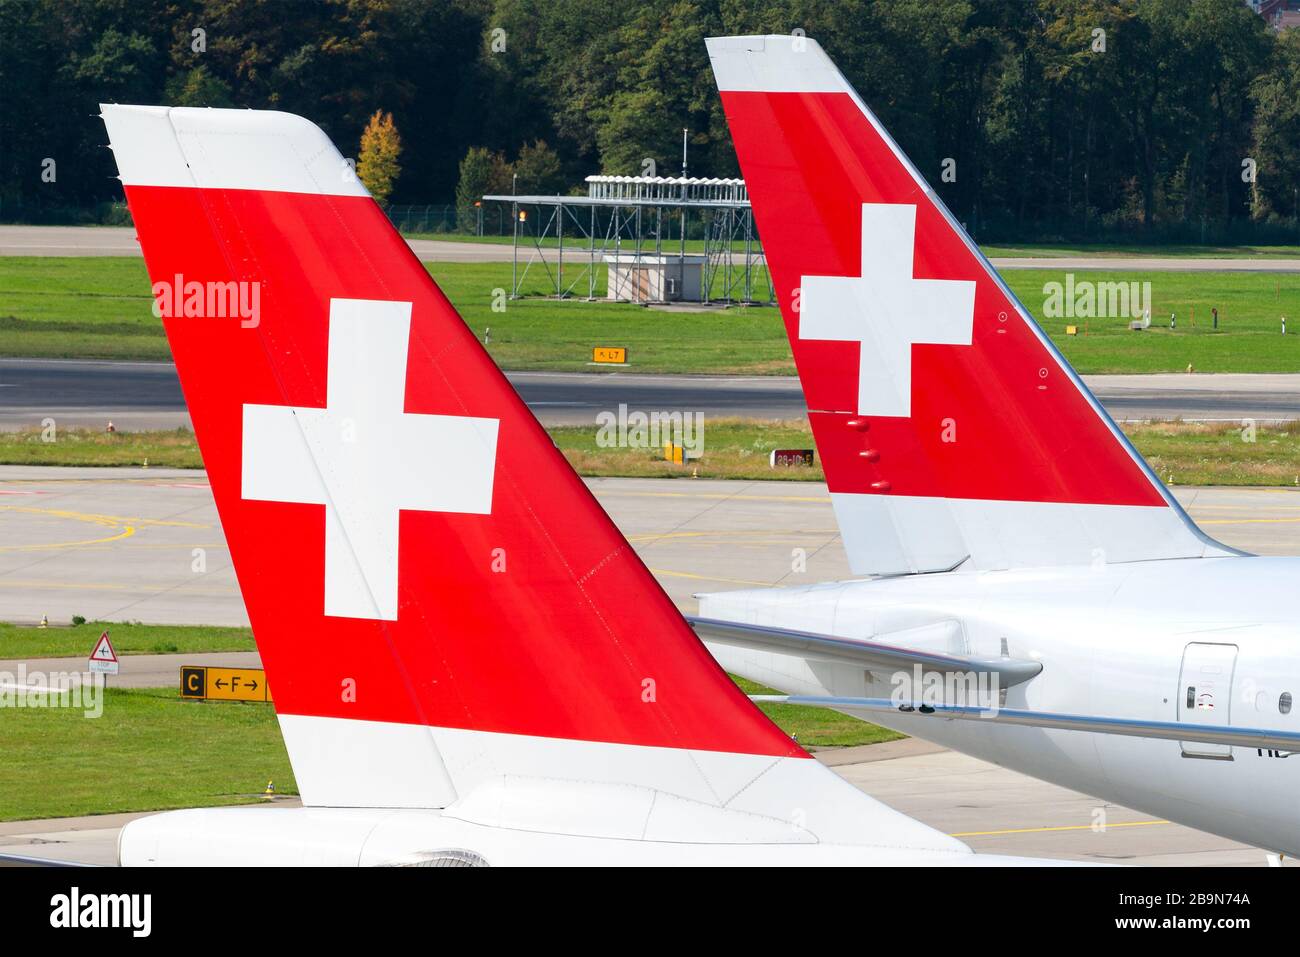 Two Swiss Airlines Boeing 777 tails together at Zurich Kloten Airport. Flag carrier of Switzerland. Livery with red and white cross. Stock Photo